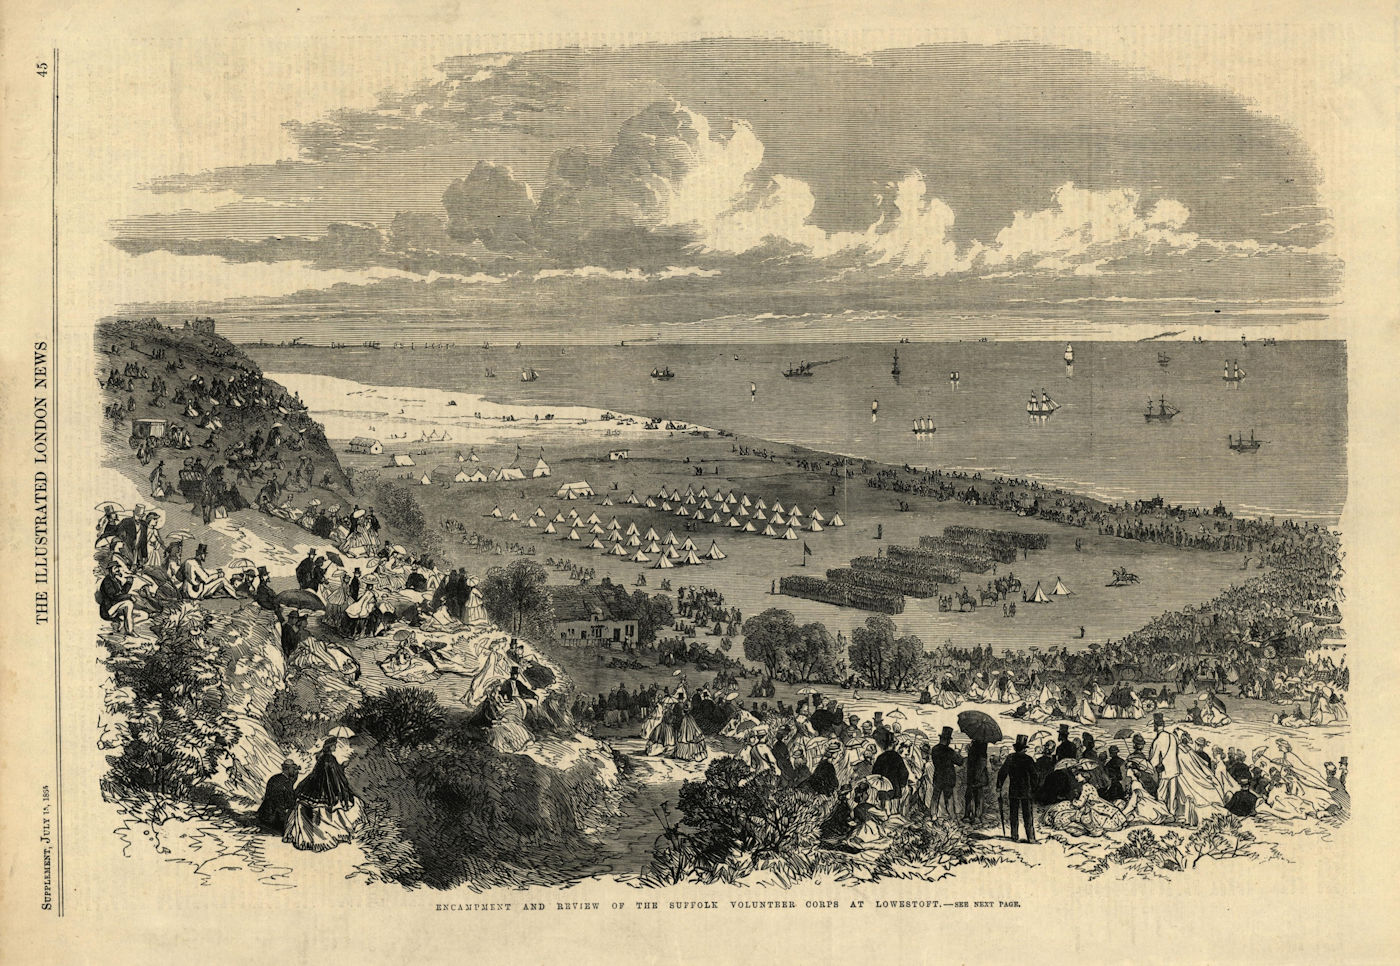 Encampment & review of the Suffolk Volunteer Corps at Lowestoft. Militaria 1865